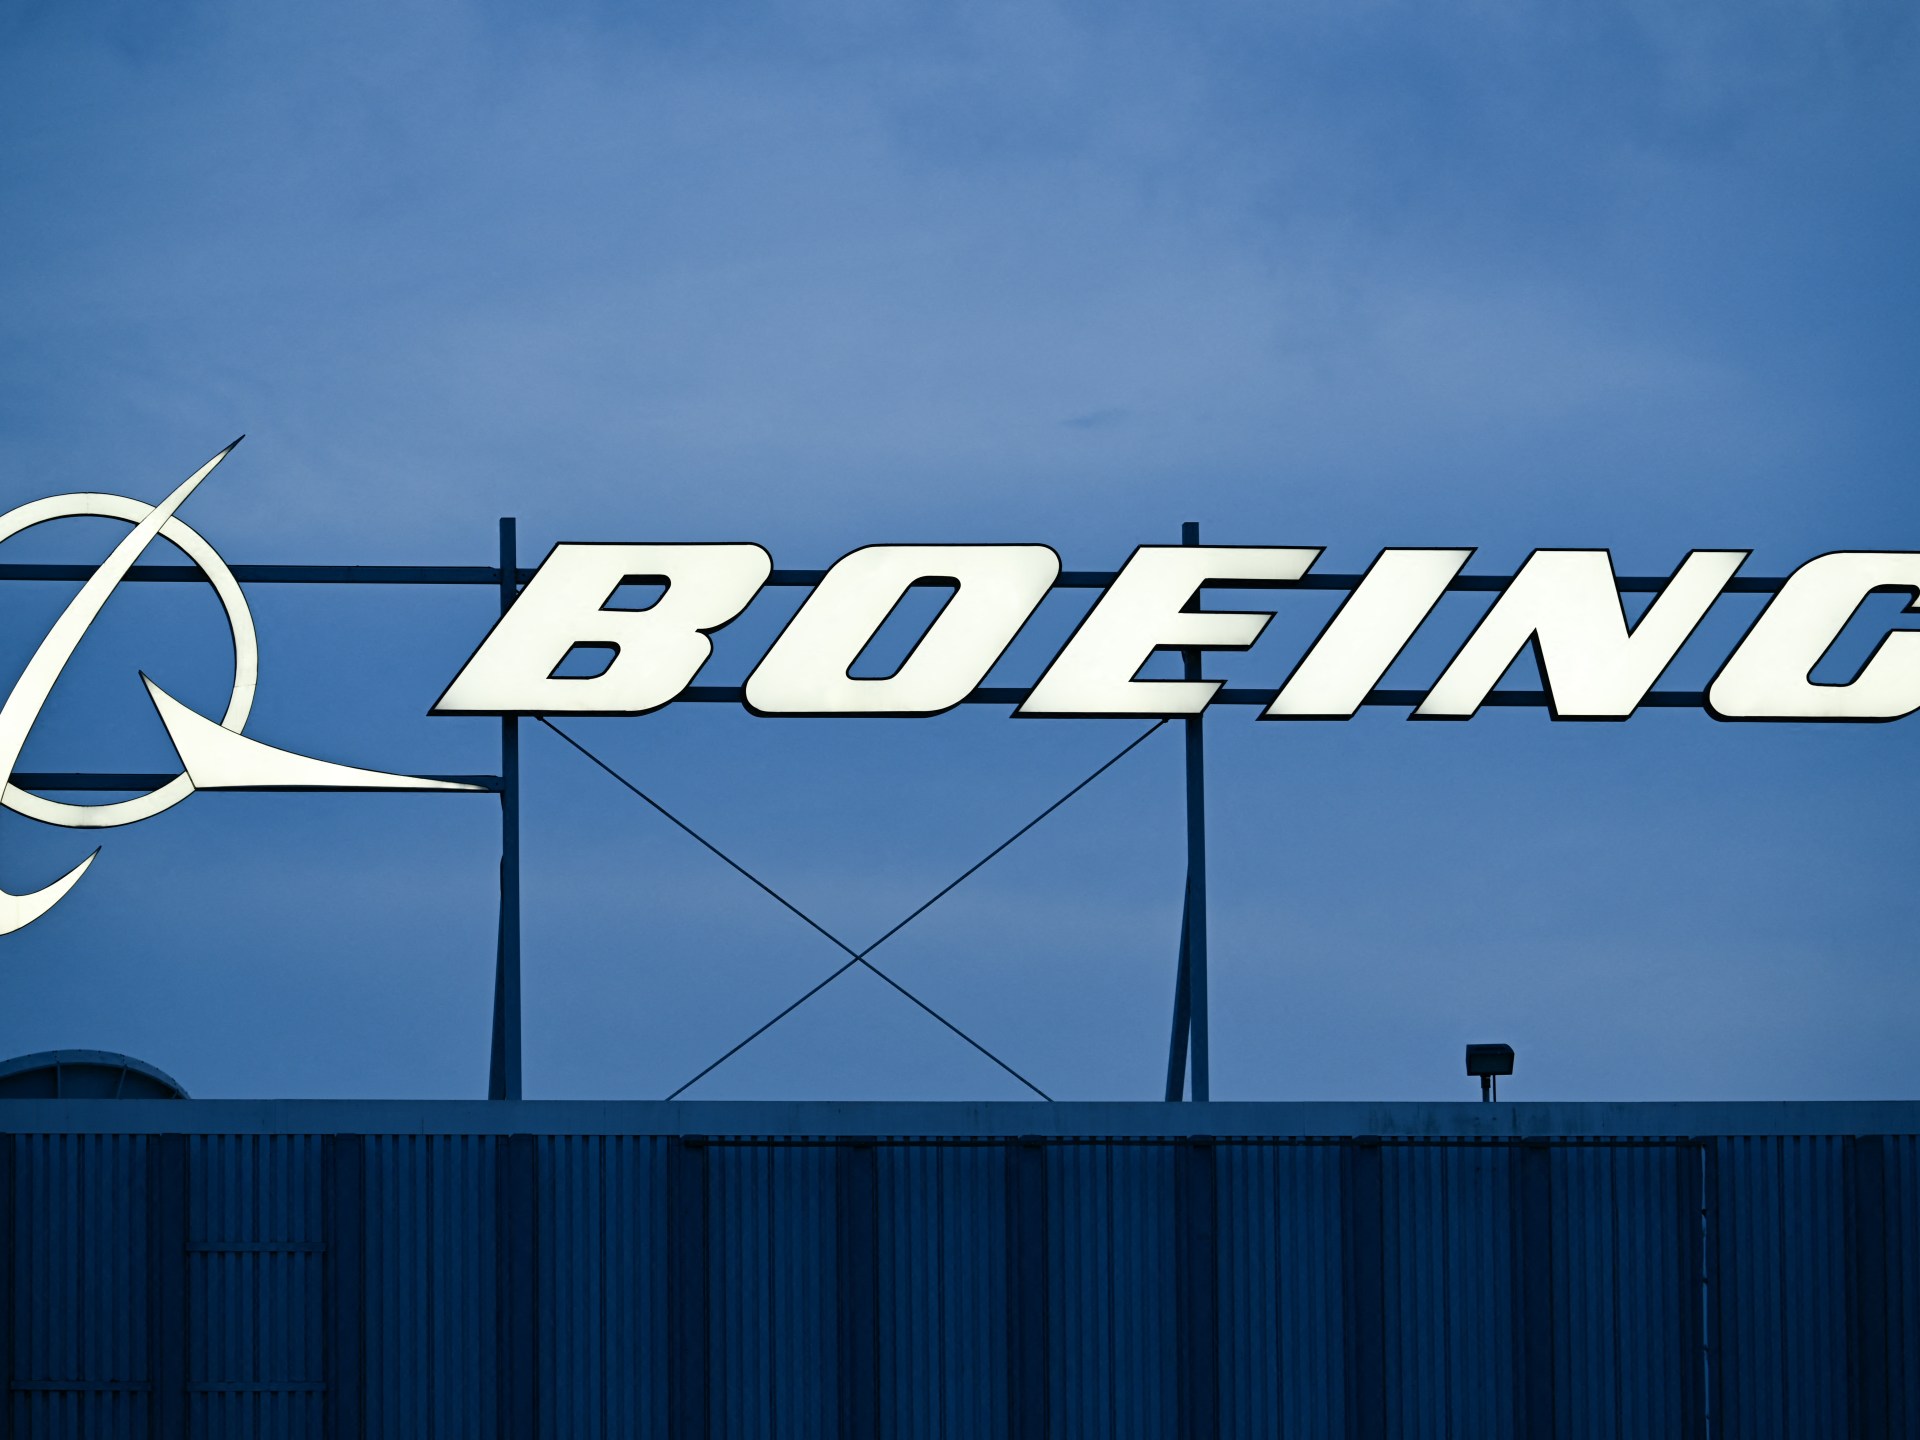 Boeing subject of 32 whistleblower complaints, documents reveal